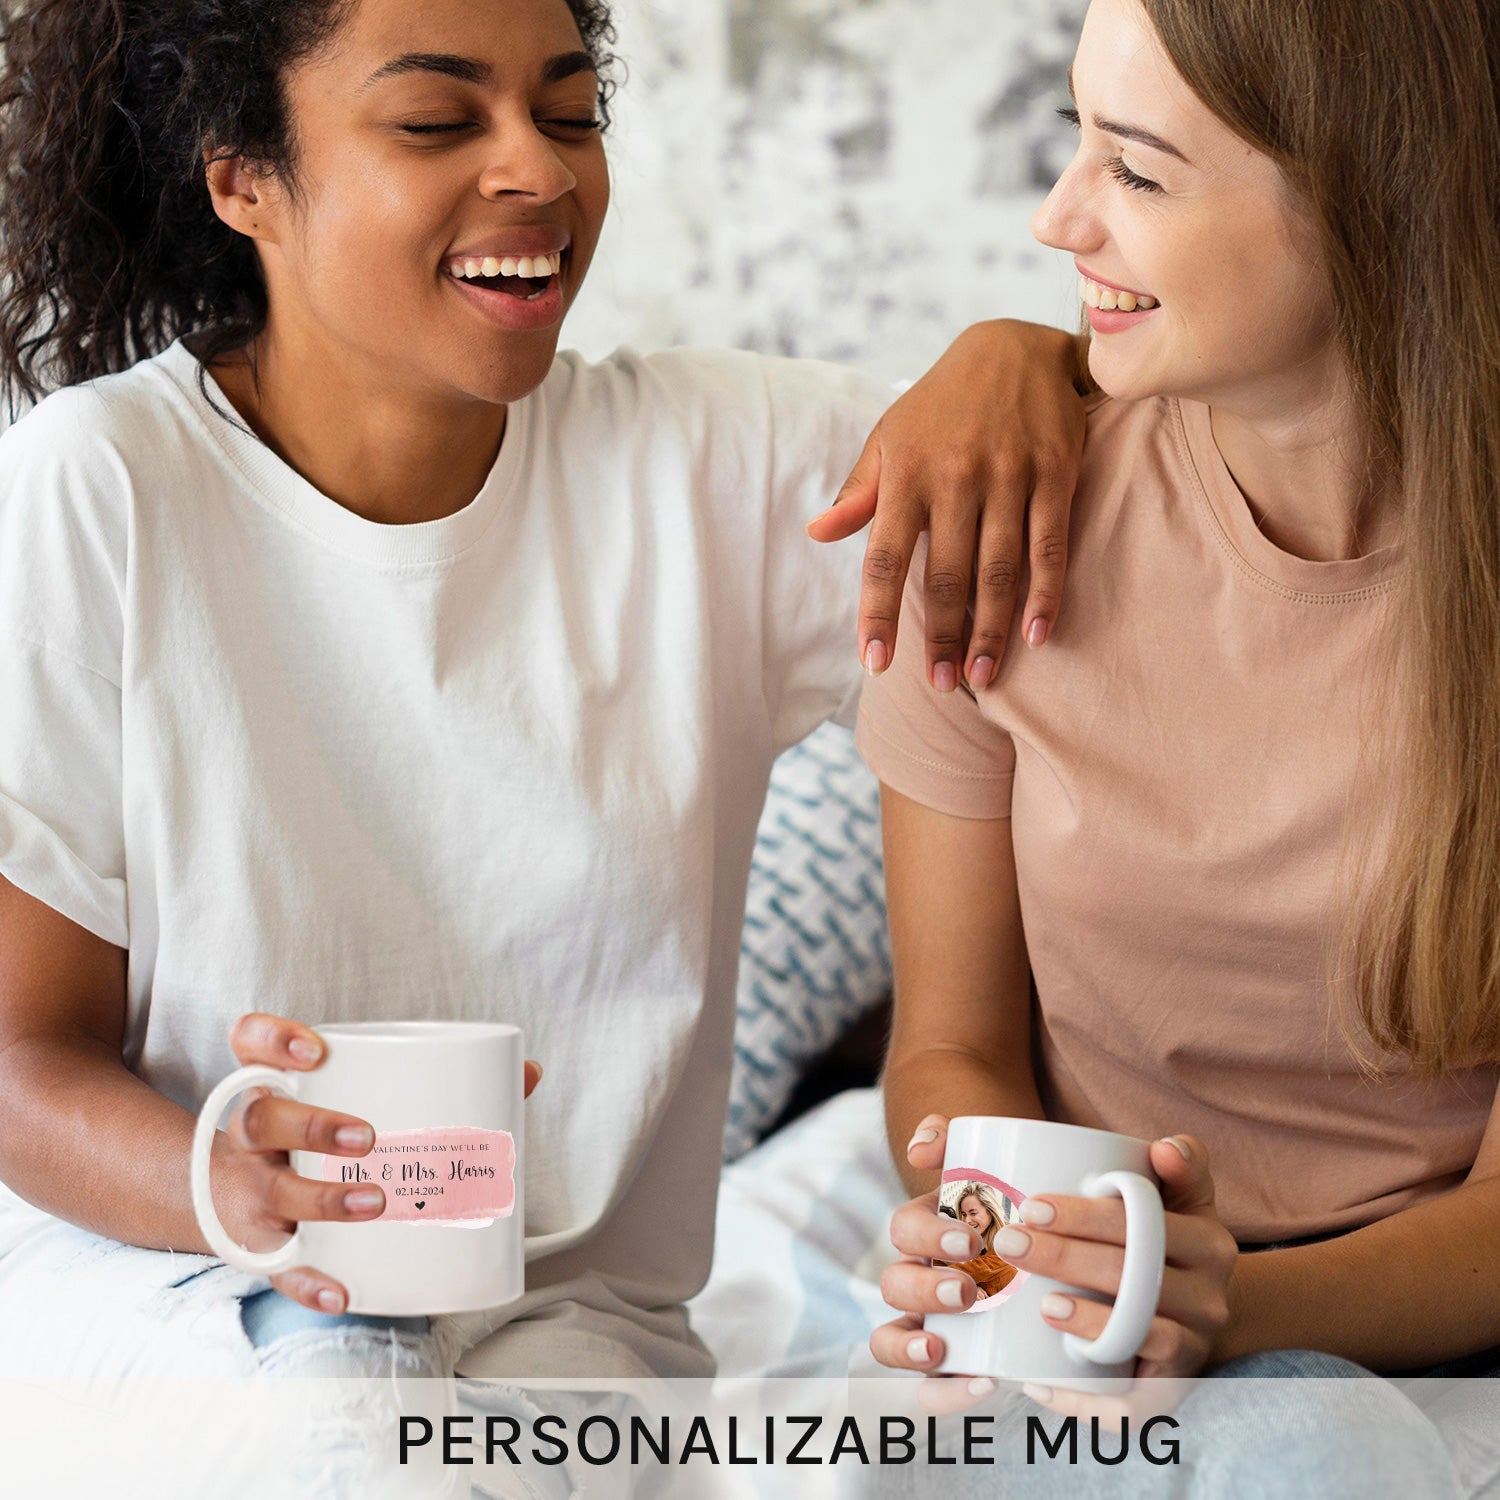 Next Valentine's Day We'll Be Mr. & Mrs. - Personalized Valentine's Day gift For Fiance - Custom Mug - MyMindfulGifts